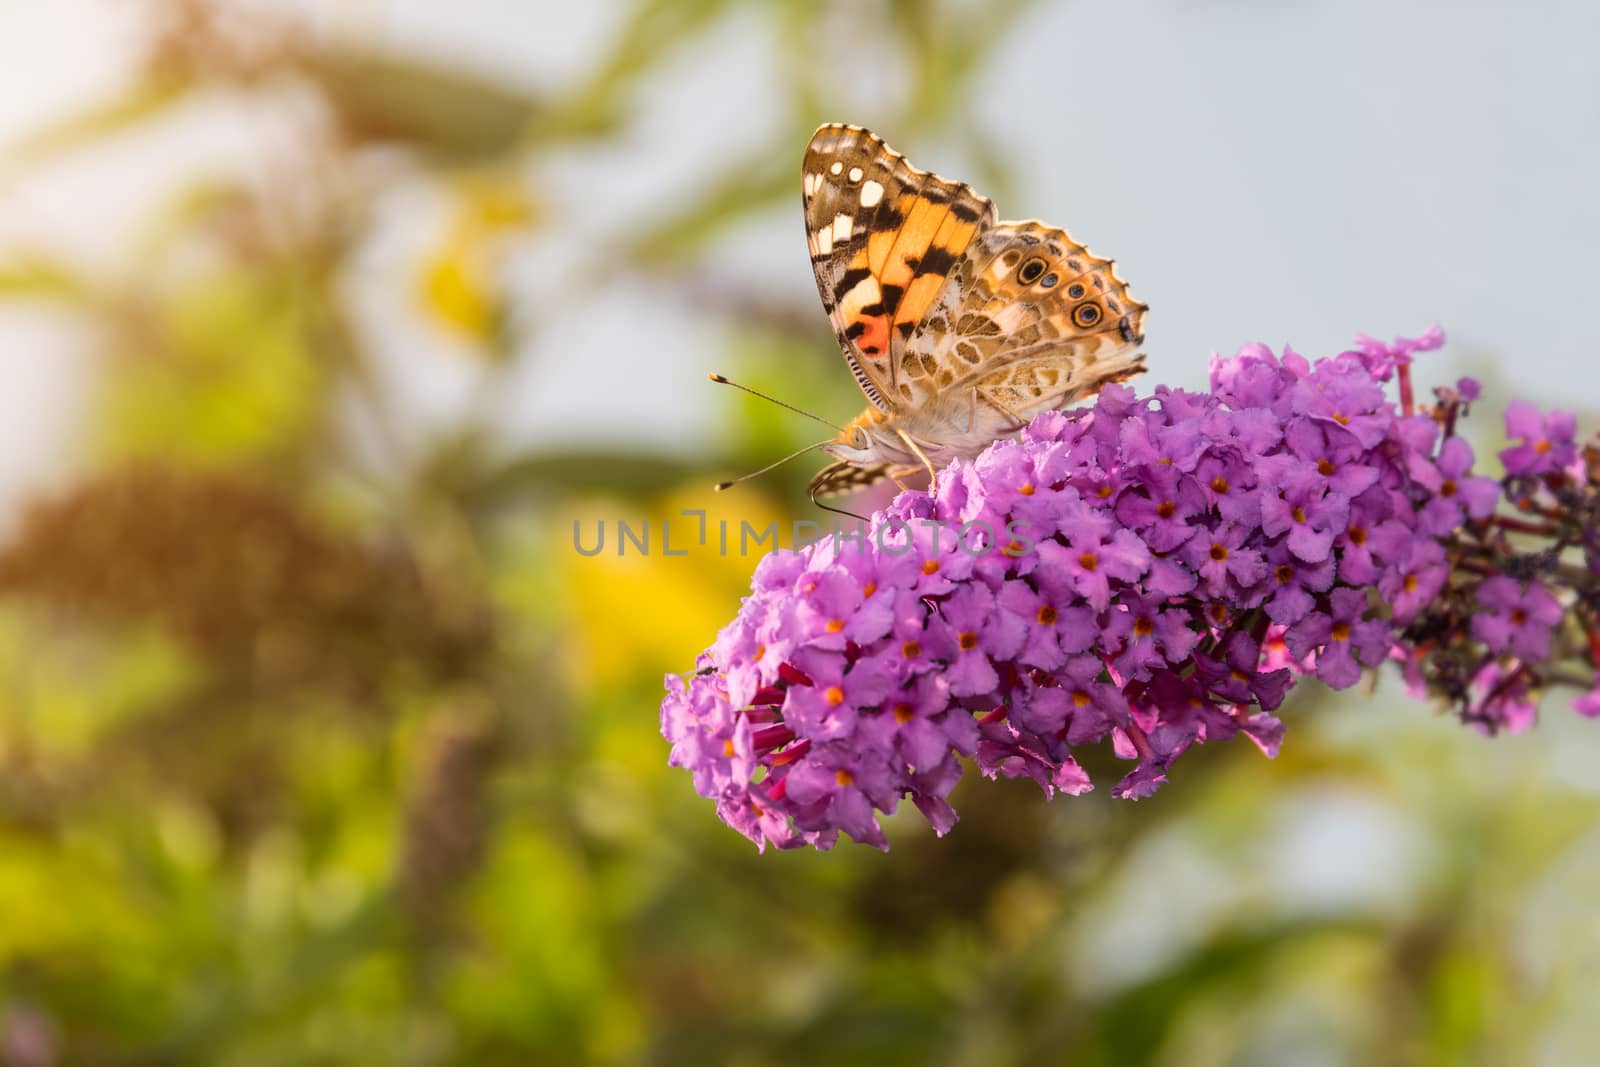 Painted Lady butterfly, Vanessa cardui, feeding on nectar from buddleia flower, lit by afternoon sun.